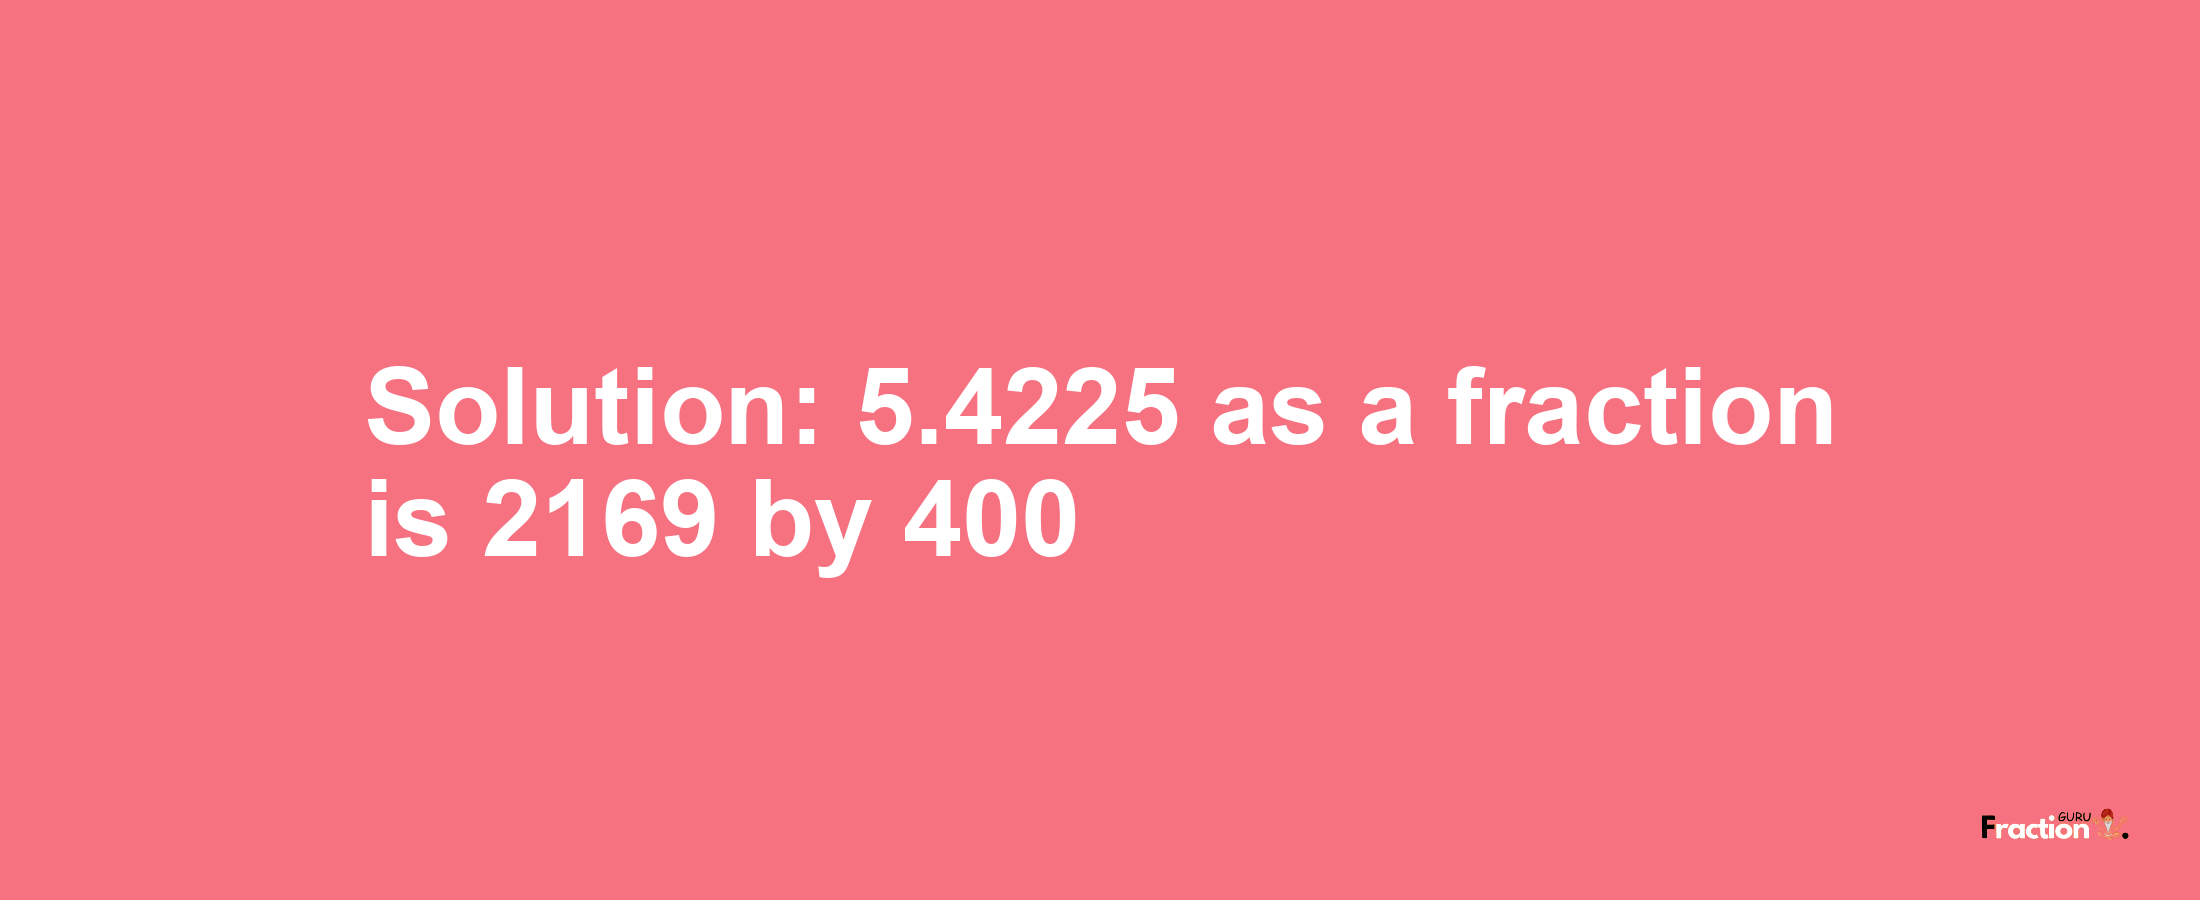 Solution:5.4225 as a fraction is 2169/400